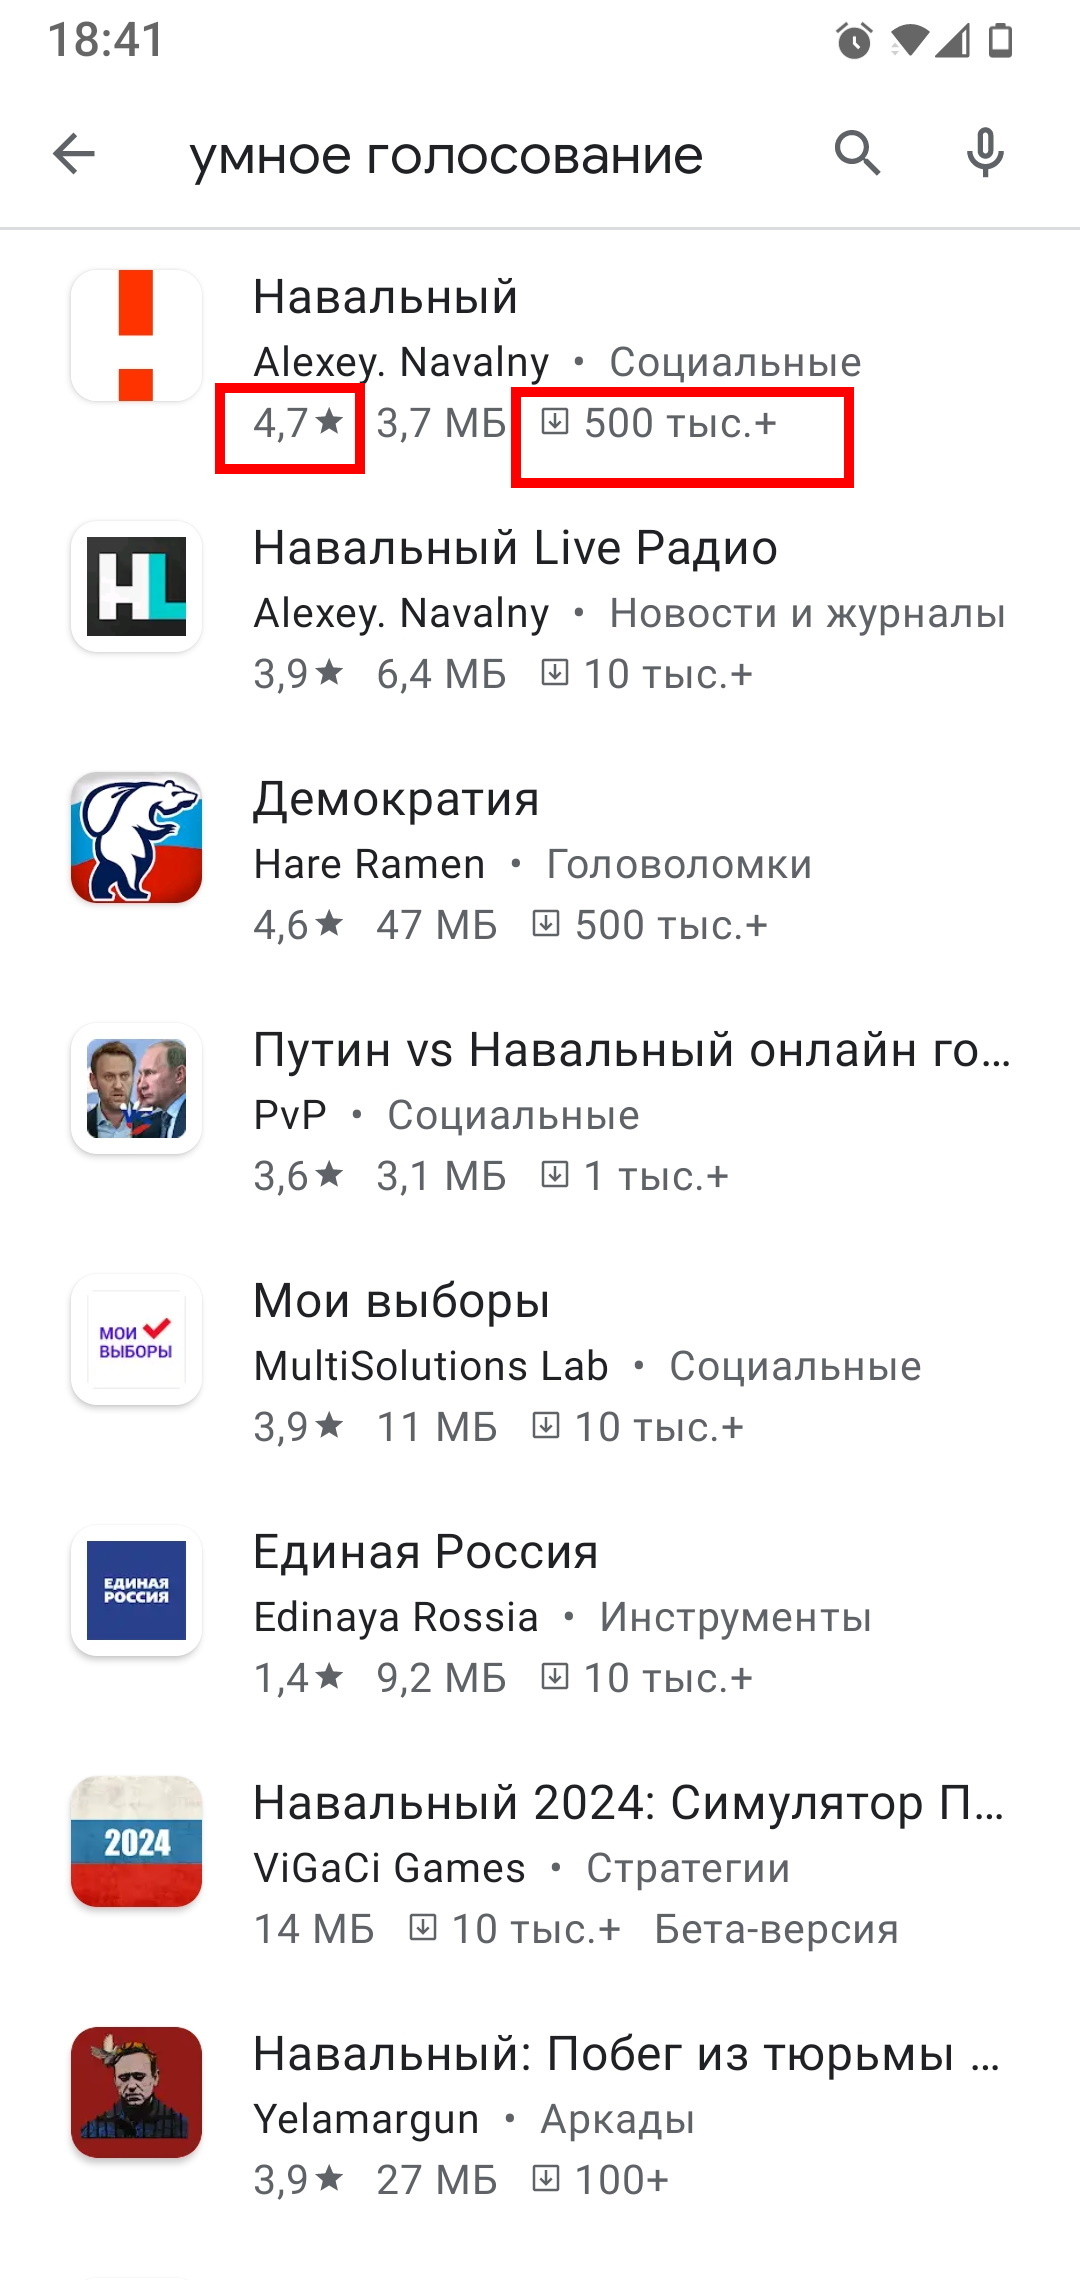 Google slept on the promotion of Navalny's Smart Voting - Alexey Navalny, Smart voting, Vote, Vladimir Putin, USA, Russia, Elections, Opposition, Video, Longpost, , Politics